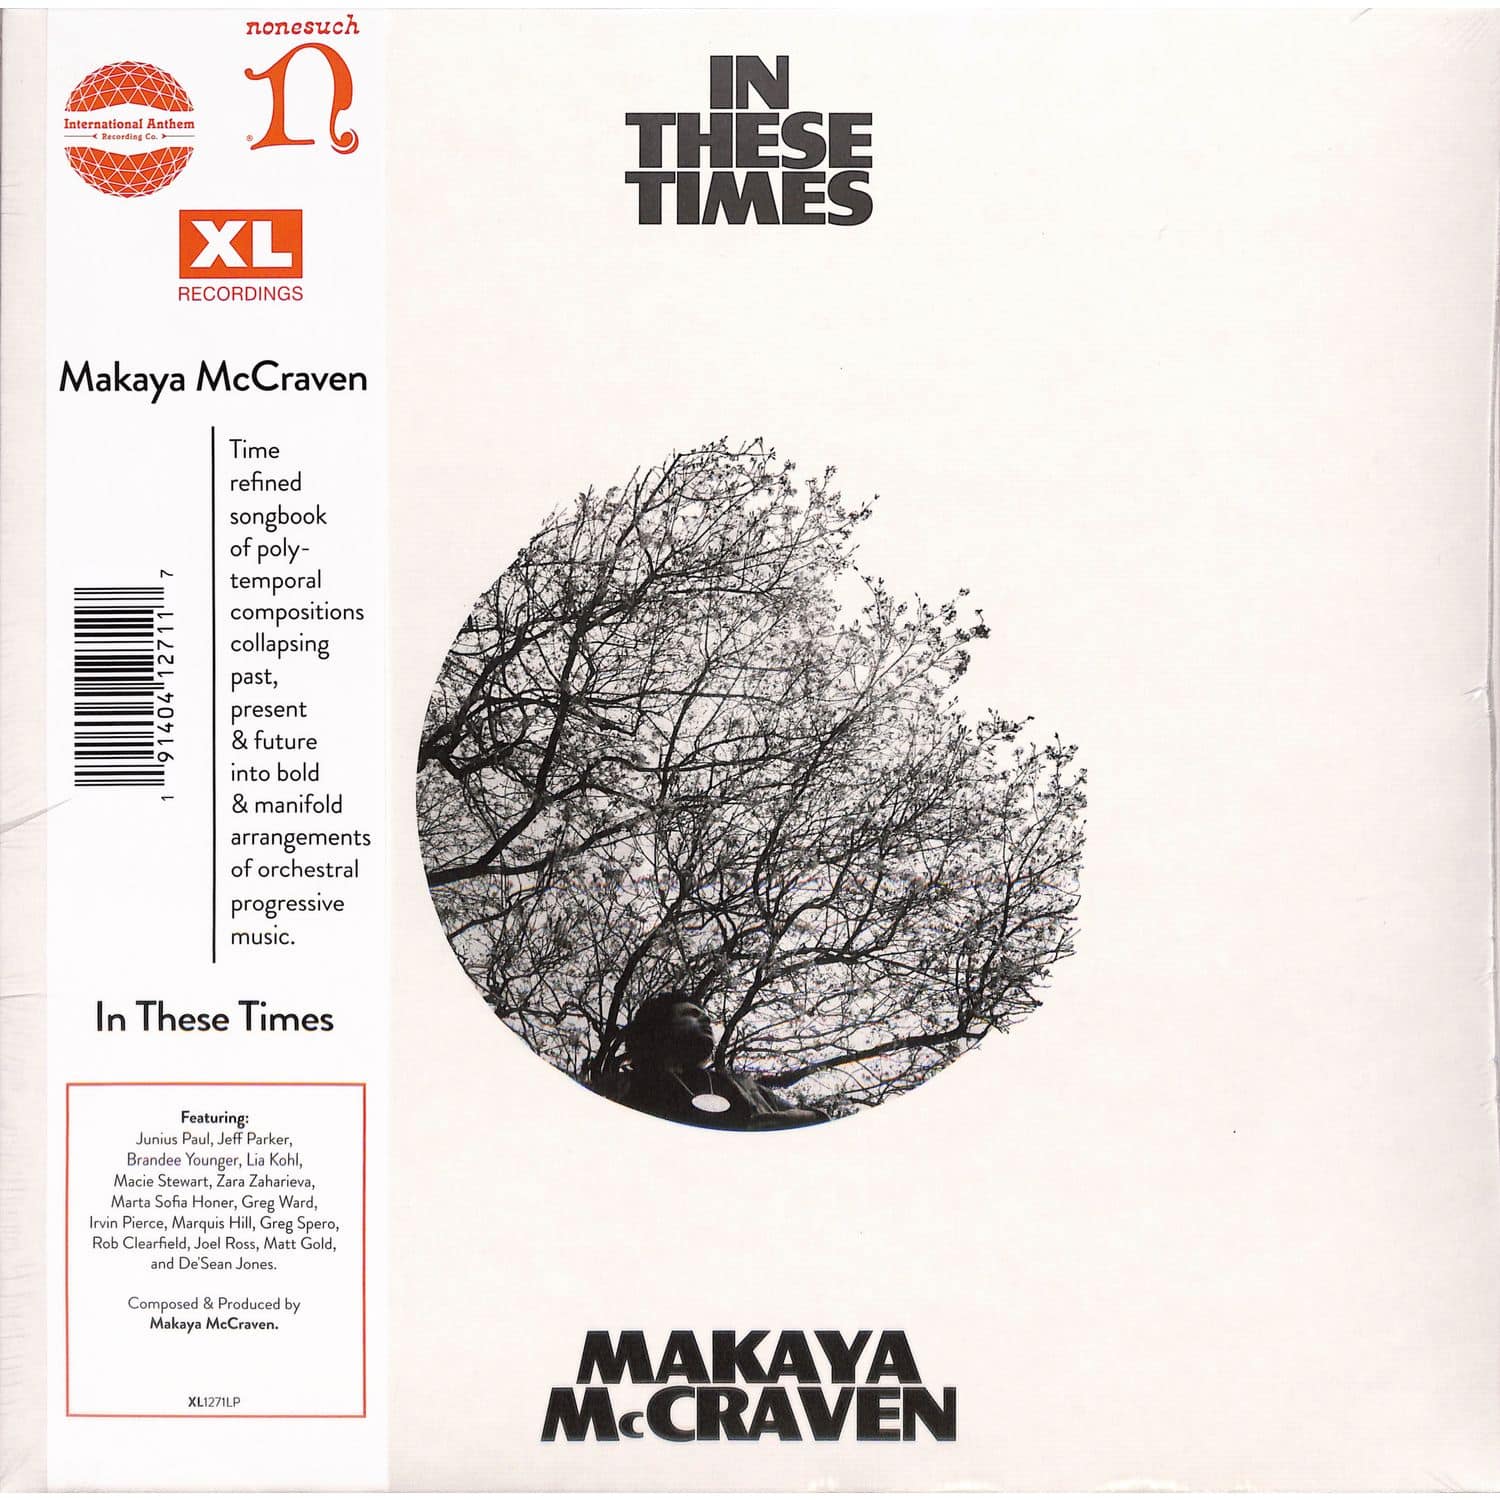 Makaya McCraven - IN THESE TIMES 